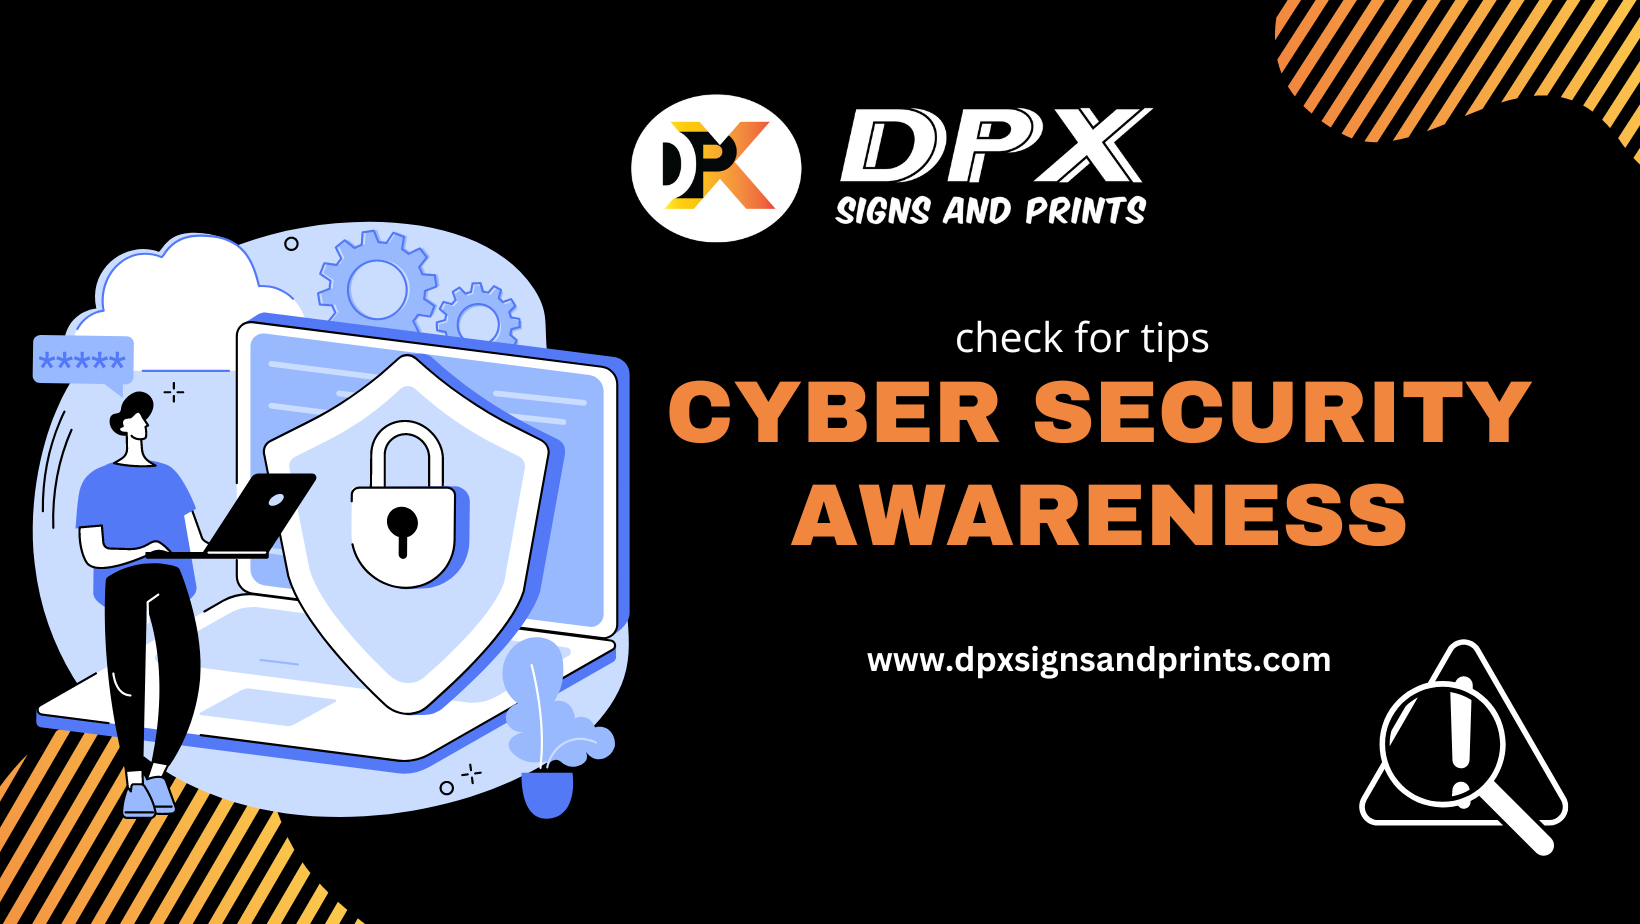 dpx_cybersecurity